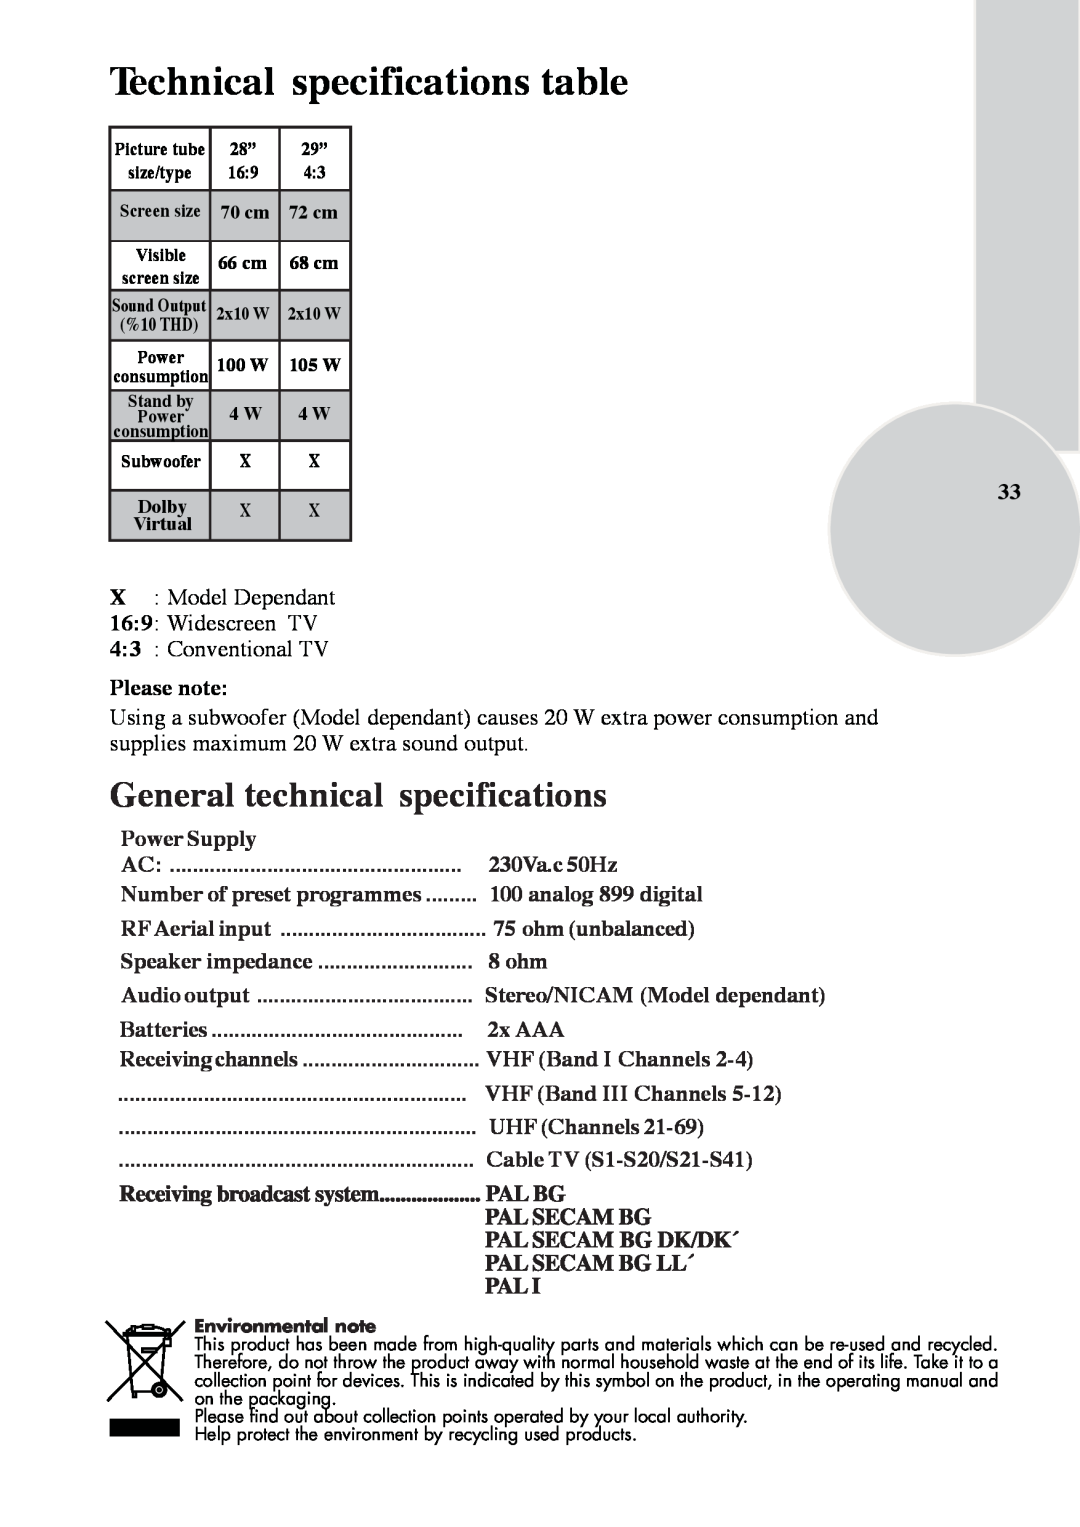 Beko 28C769IDS Technical specifications table, General technical specifications, Power Supply, 230Va.c 50Hz, 8 ohm, 2x AAA 